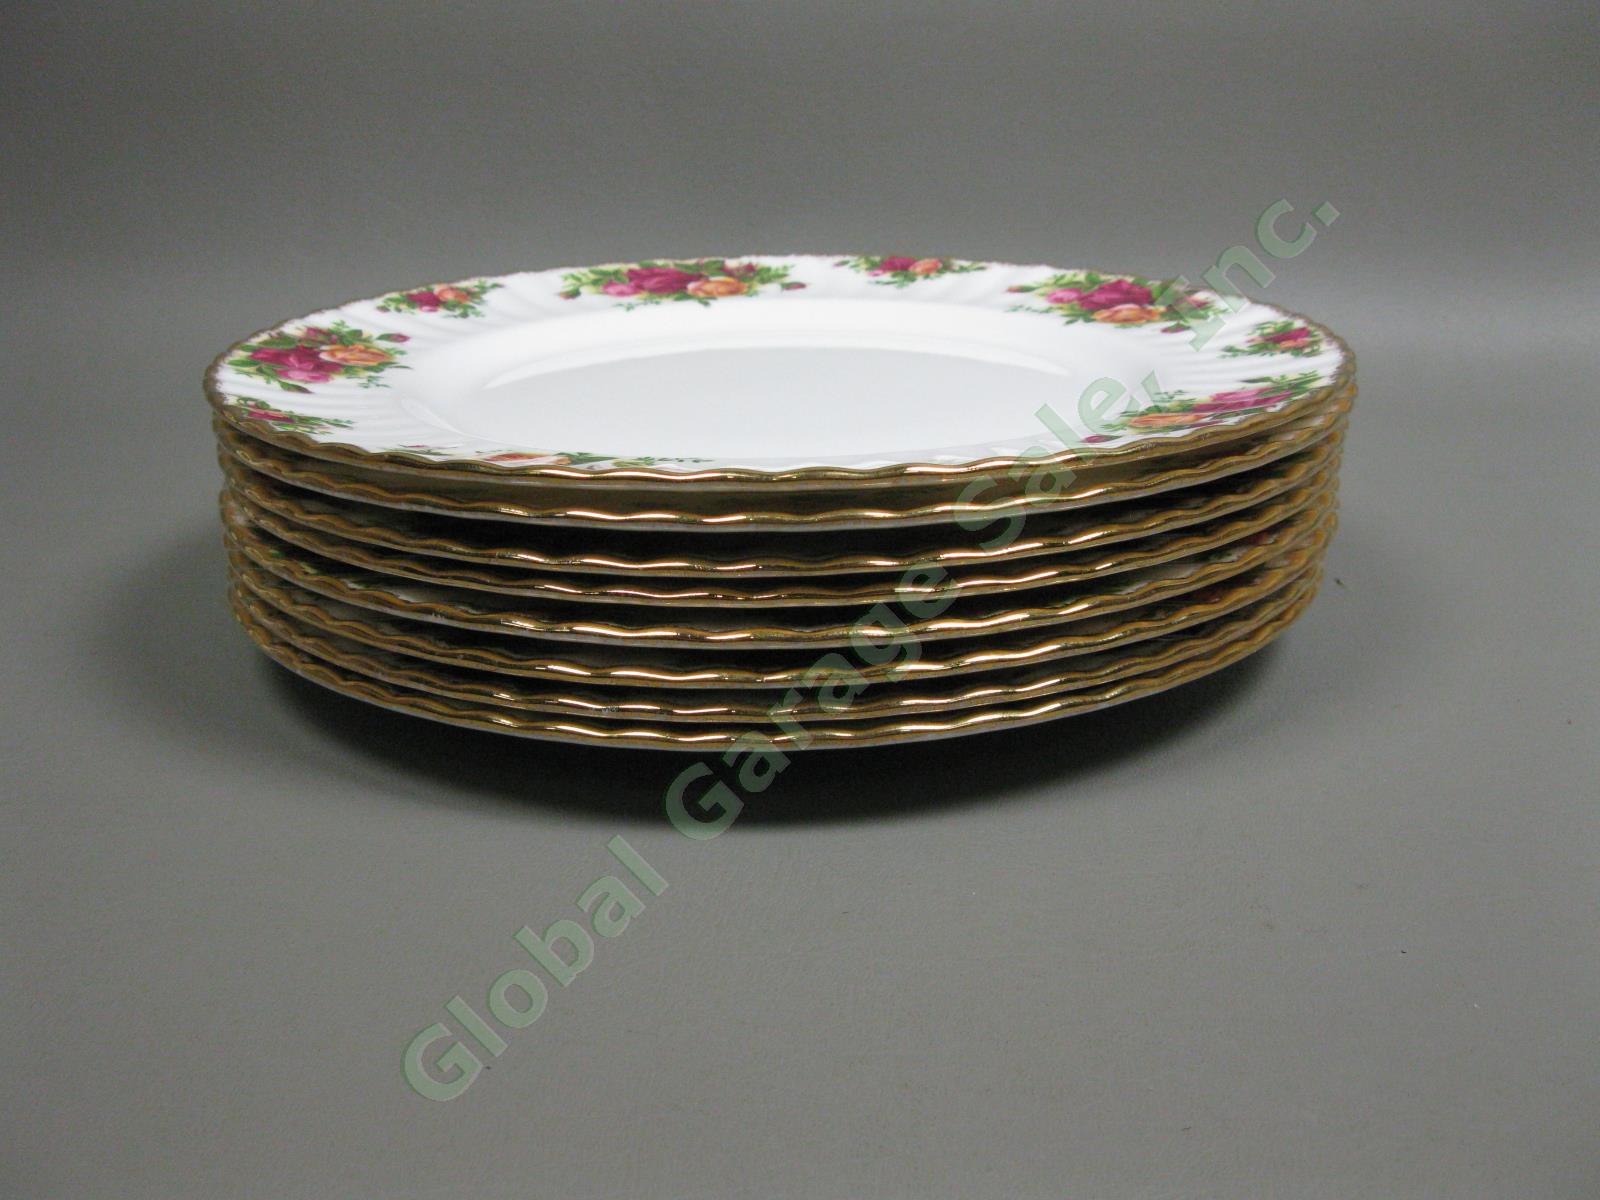 8 Royal Albert Old Country Roses Dinner Plate Fluted Gold Trim Bone China Set NR 7